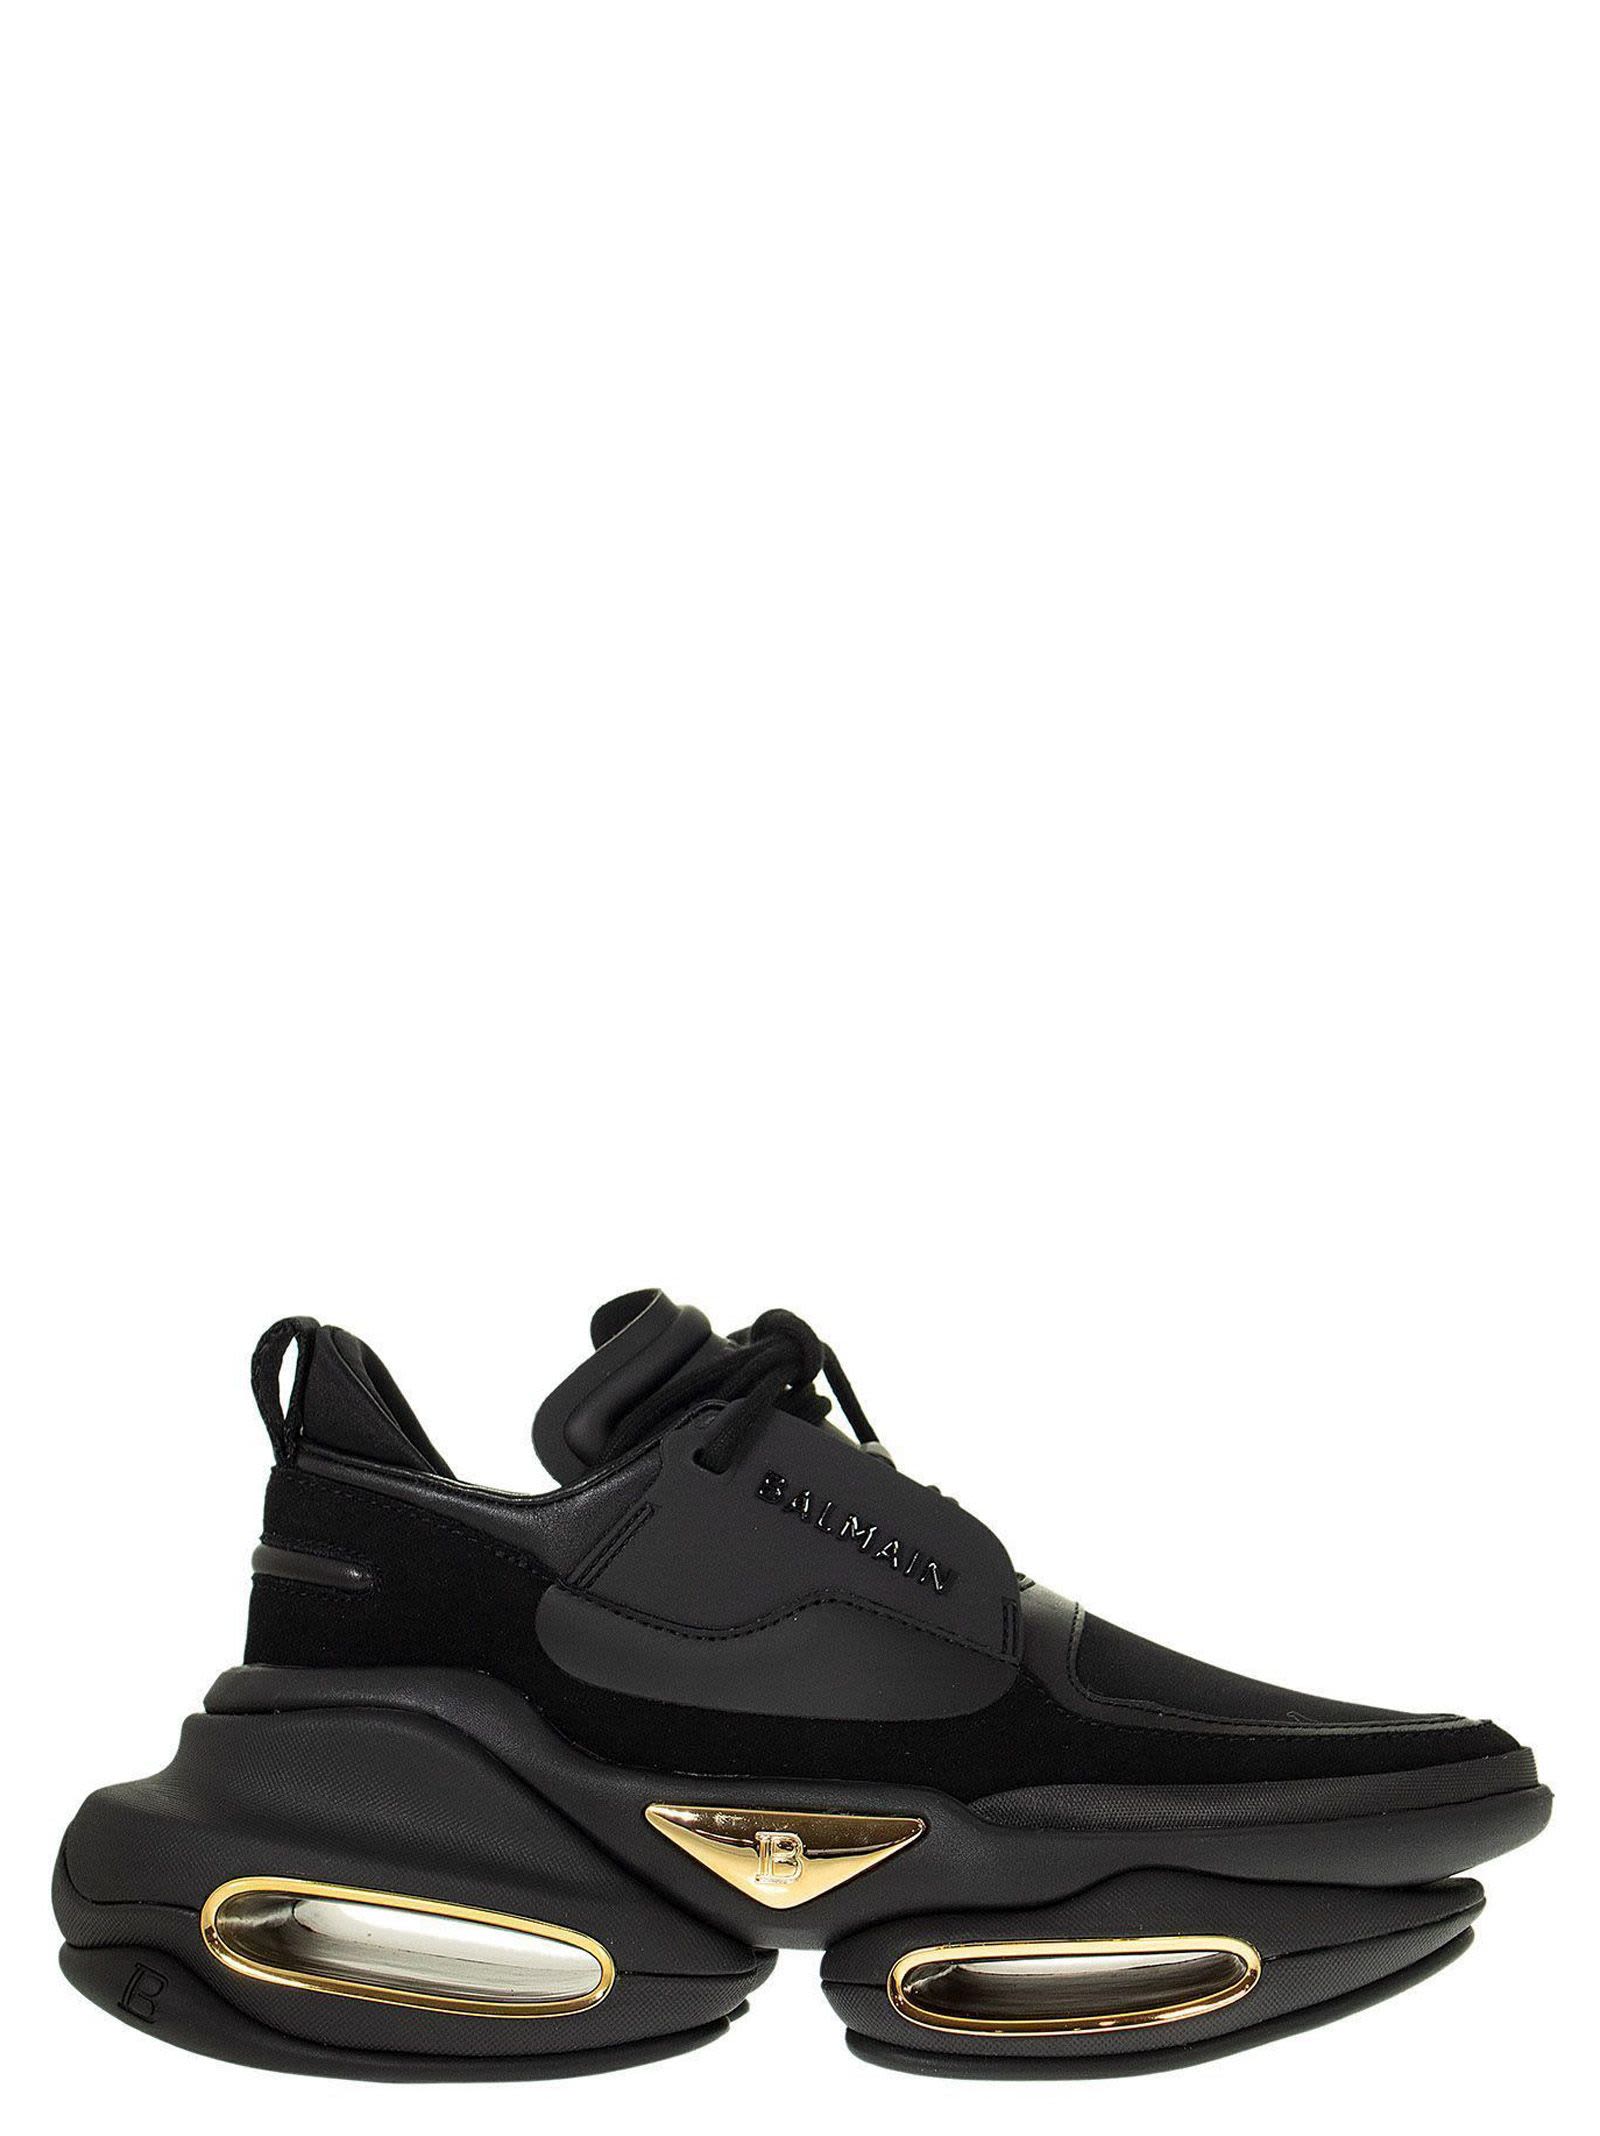 Balmain Bbold Black Suede And Leather Sneakers